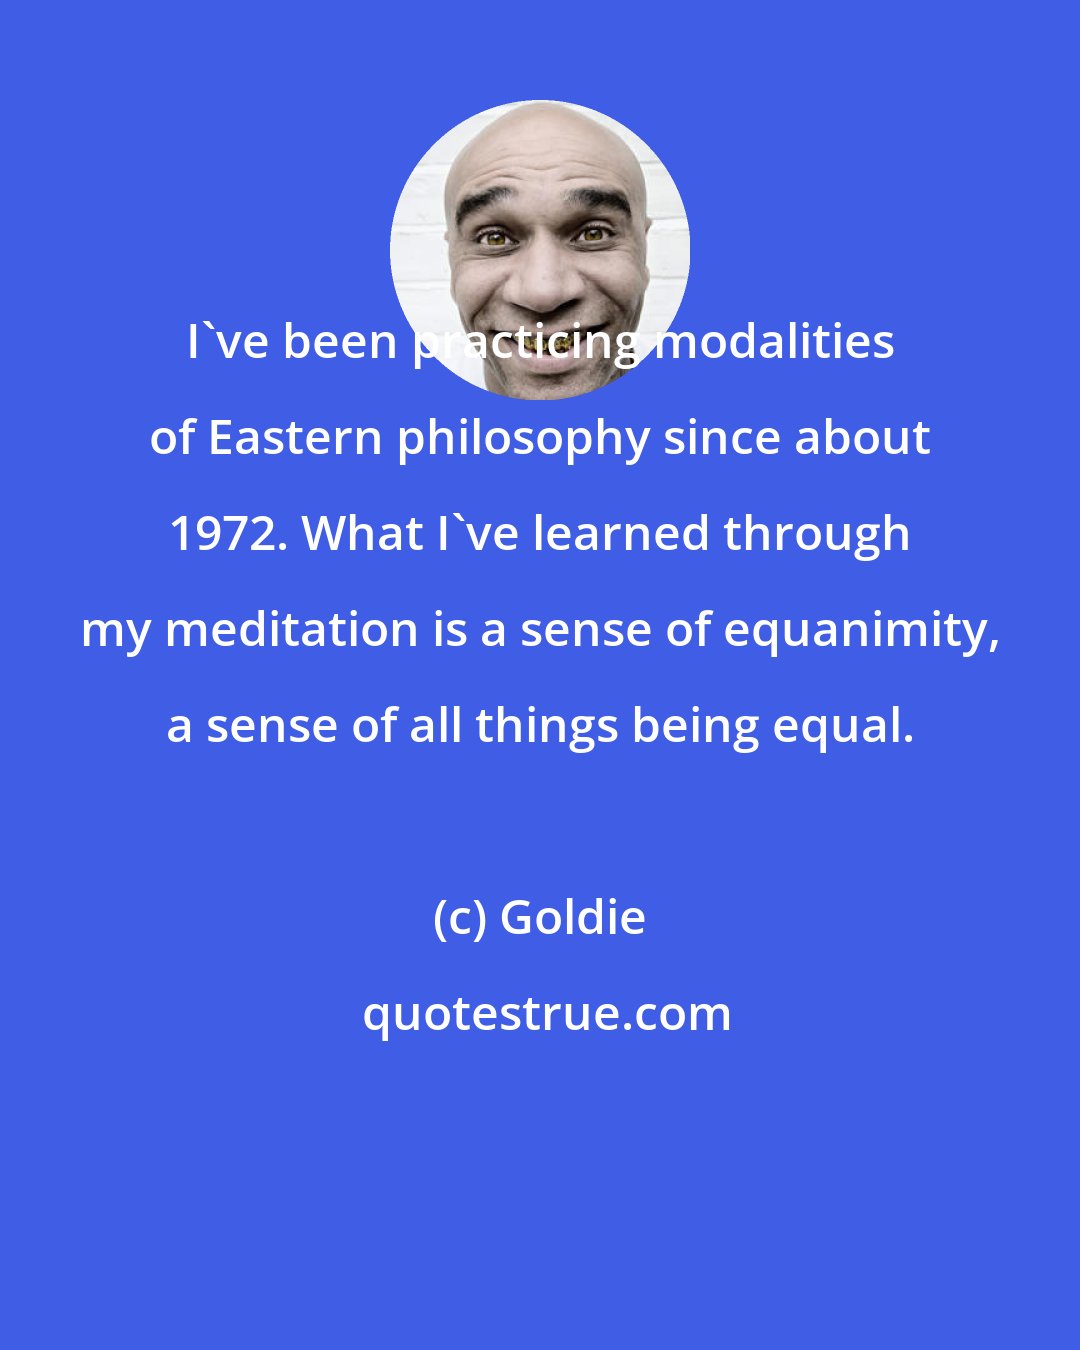 Goldie: I've been practicing modalities of Eastern philosophy since about 1972. What I've learned through my meditation is a sense of equanimity, a sense of all things being equal.